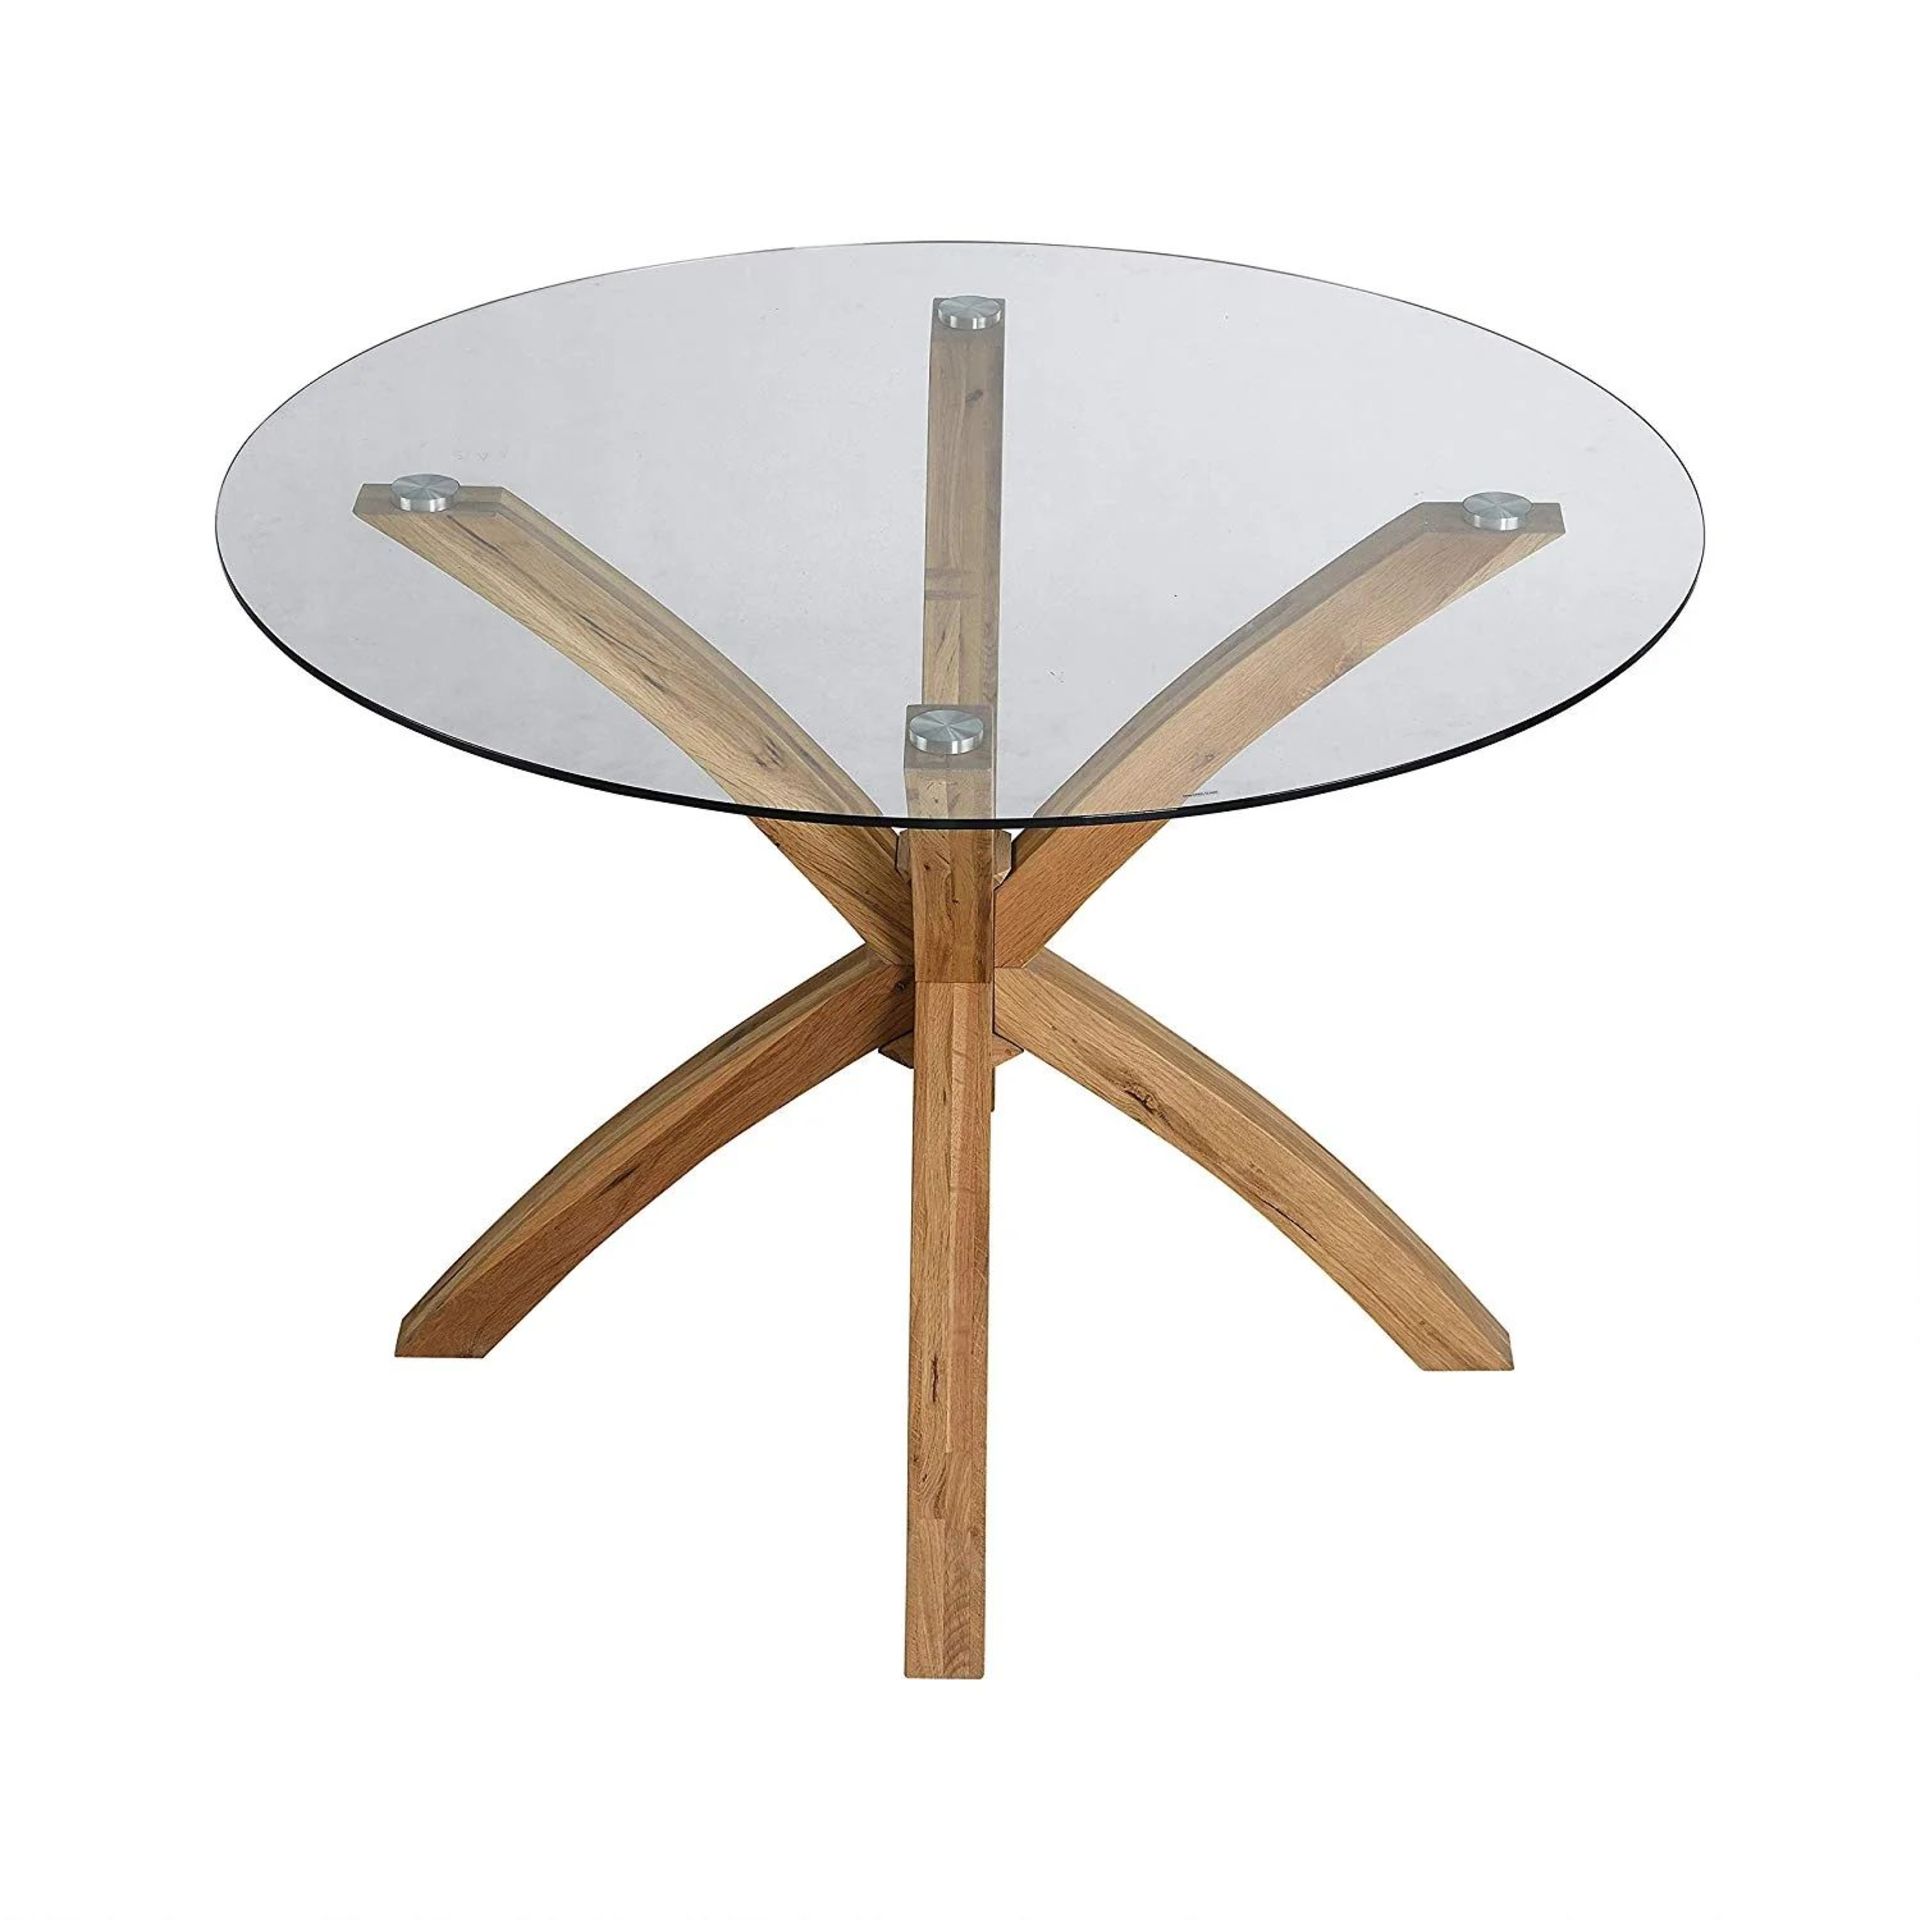 Lugano 110cm Round Glass Top Solid Oak Legs Dining Table. - ER26. RRP £379.99. Featuring four subtly - Image 2 of 2